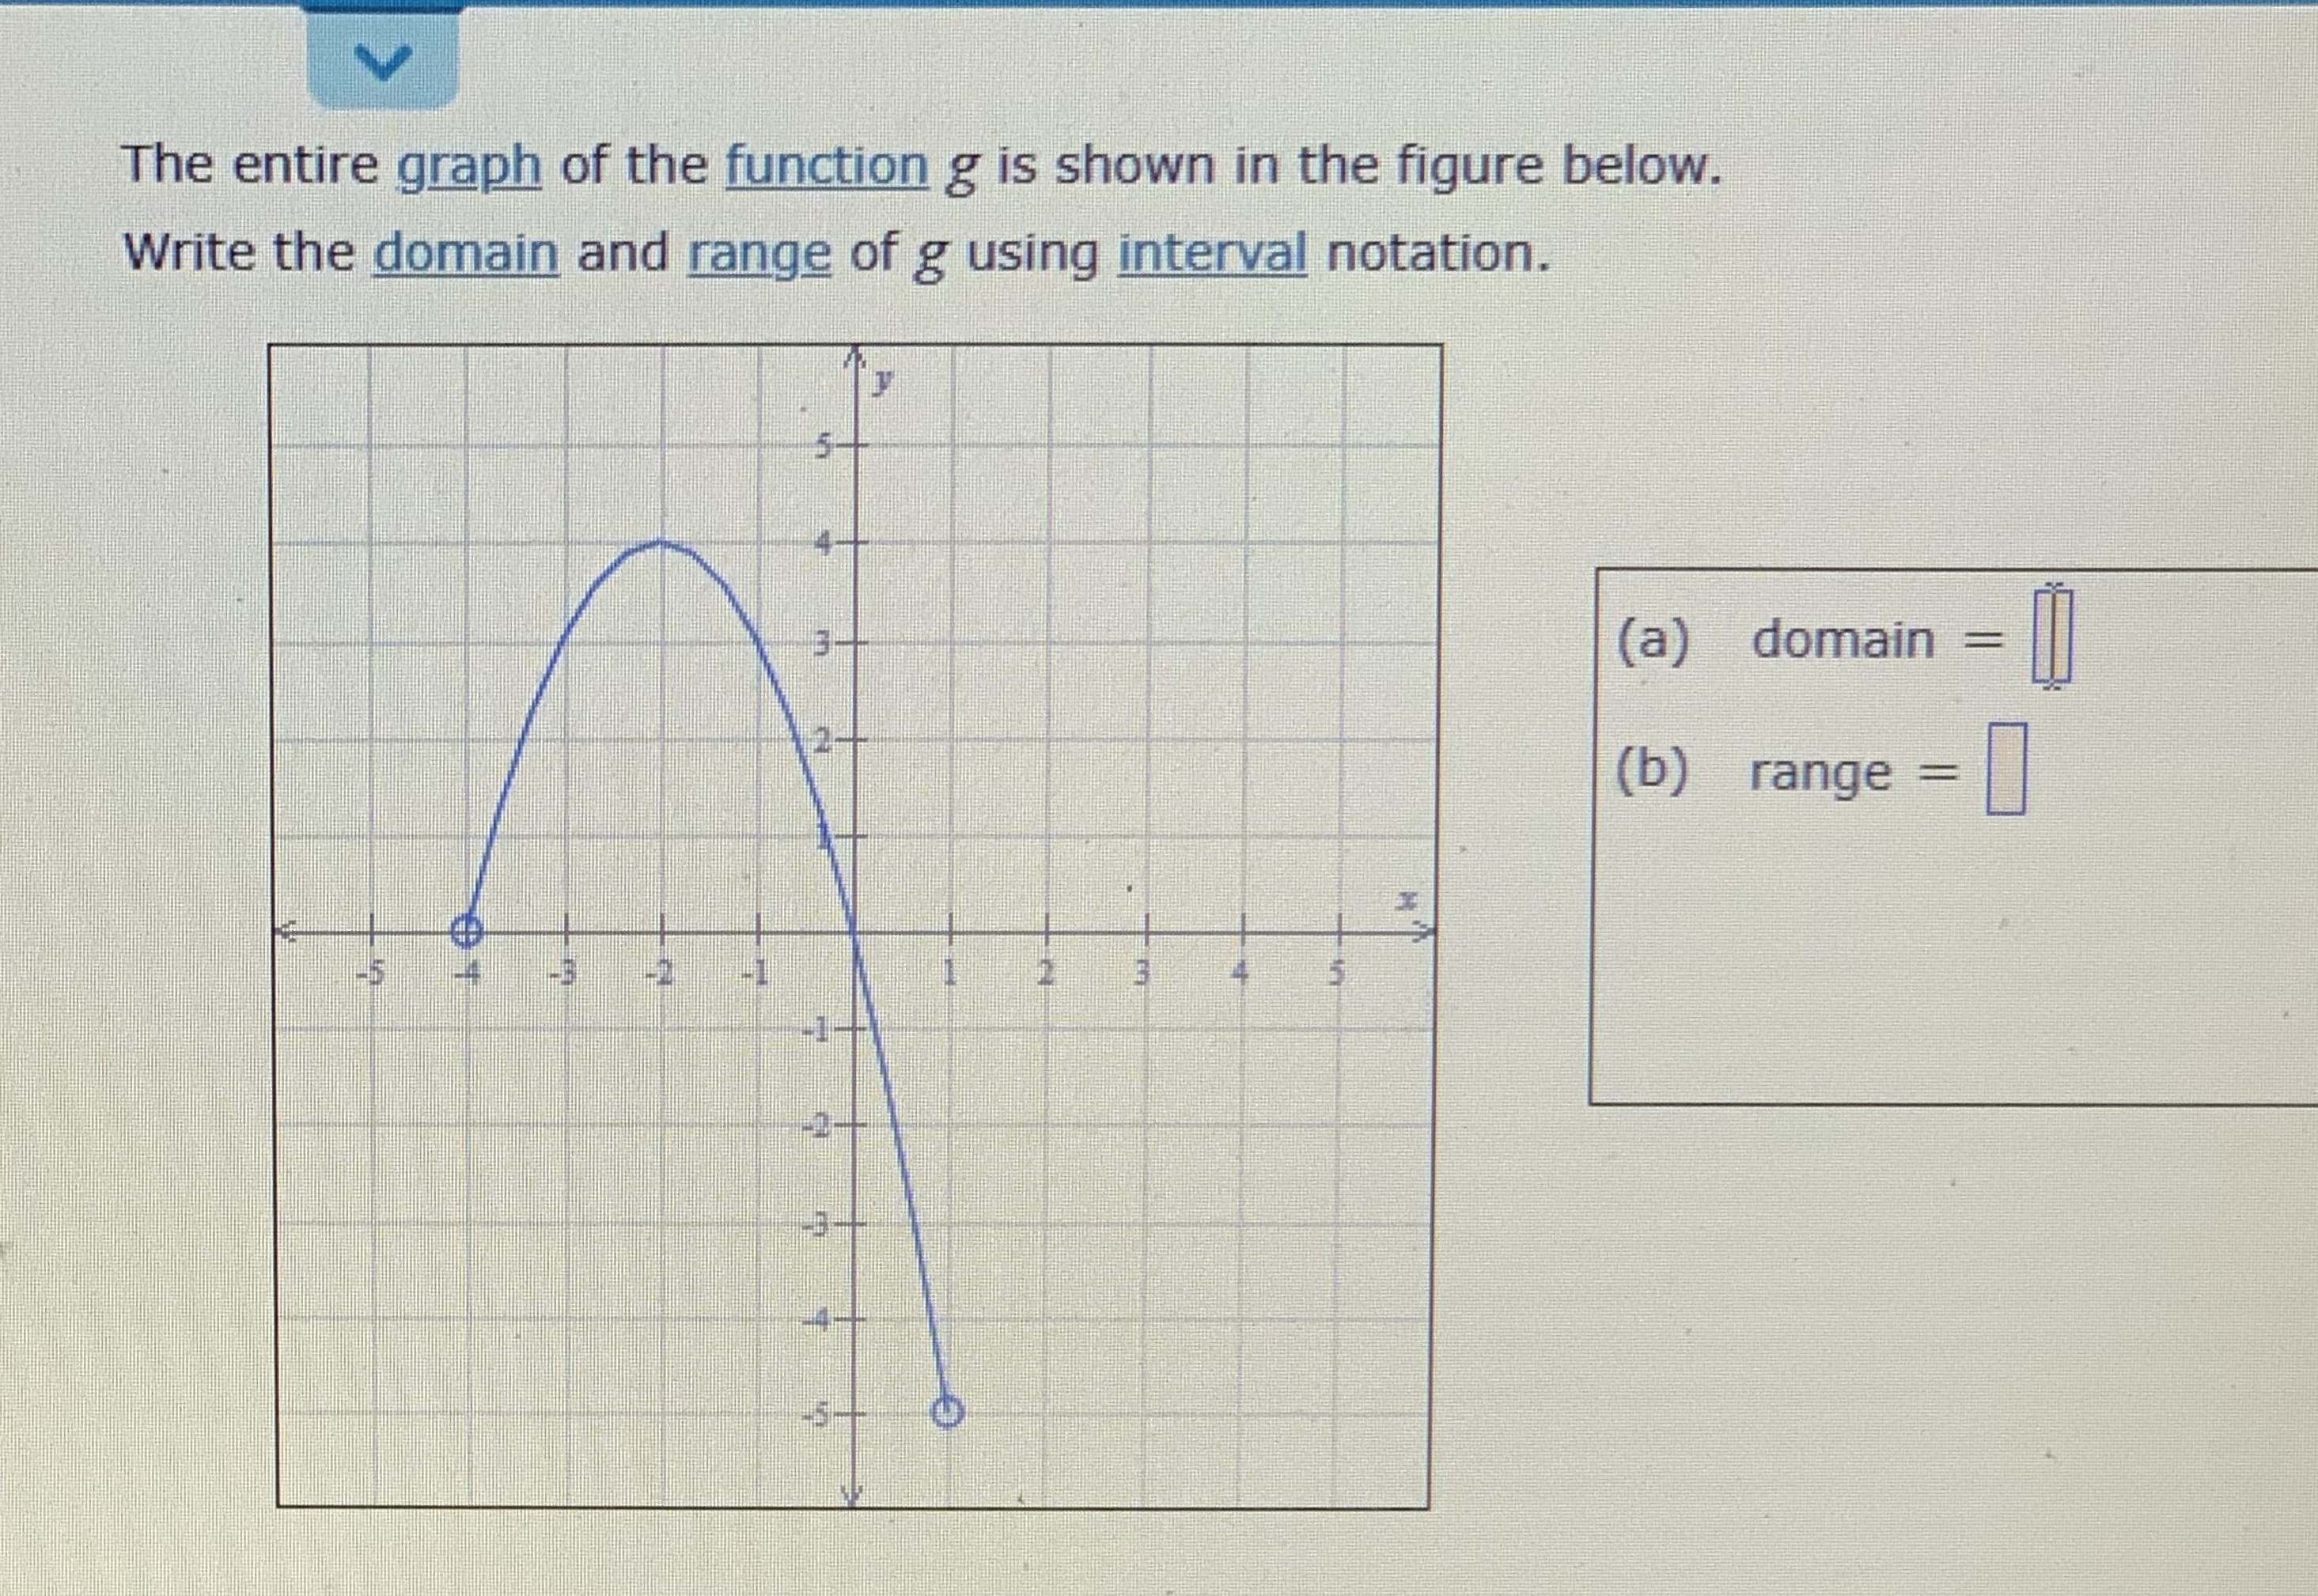 The entire graph of the function g is shown in the figure below.
Write the domain and range of g using interval notation.
